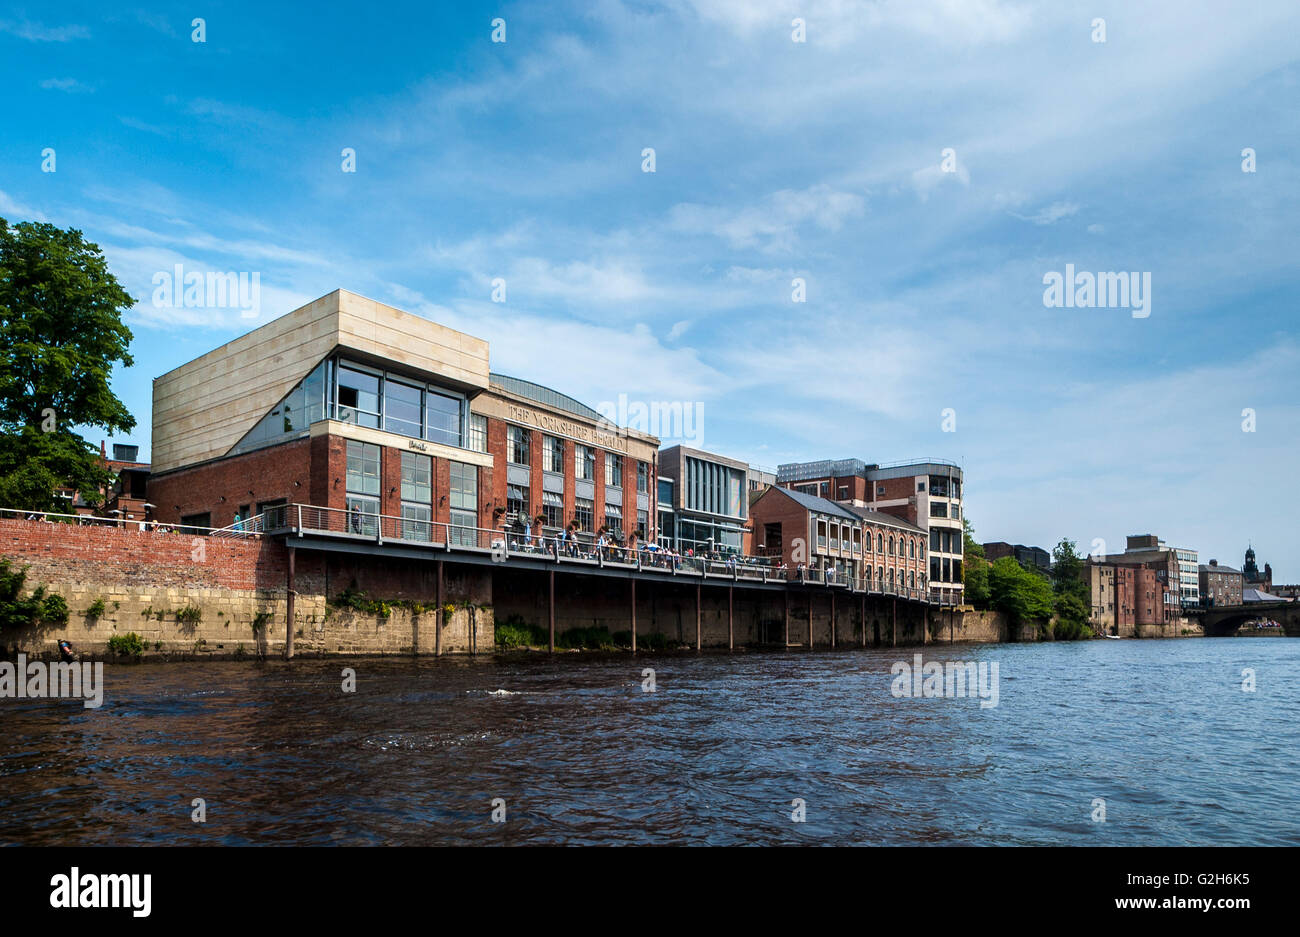 Old Yorkshire Herald building, now city Screen and Revolution with River Ouse, York, UK. Stock Photo